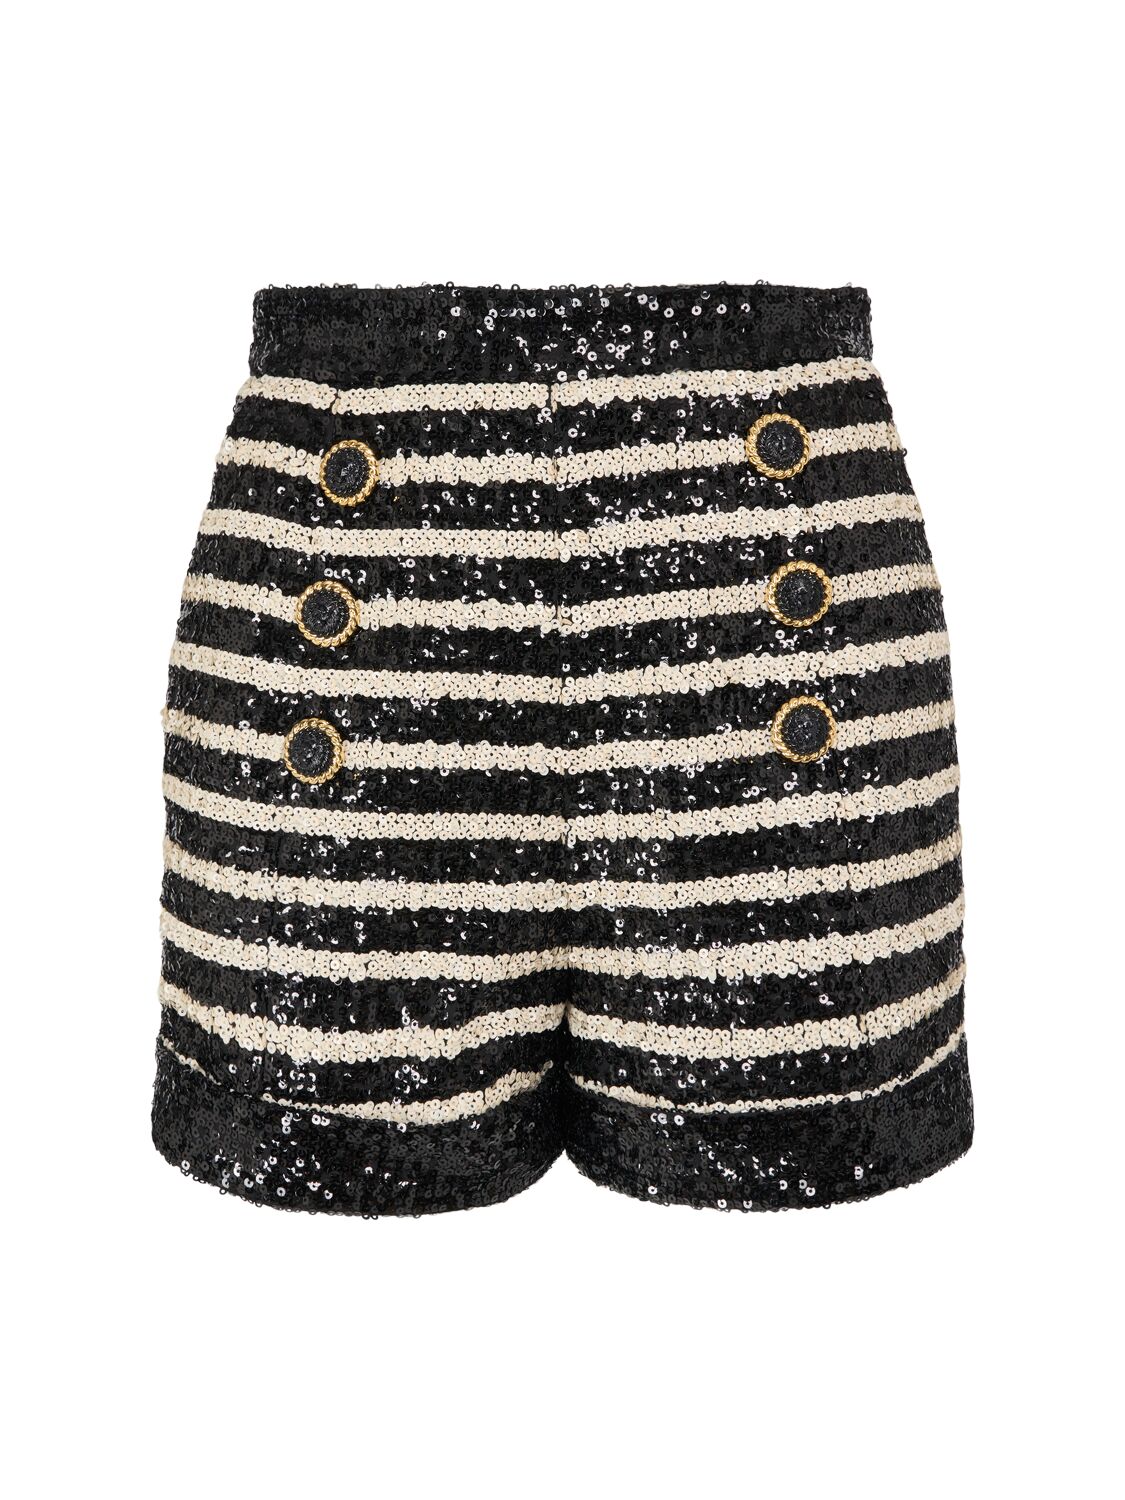 Striped Sequined High Rise Mini Shorts